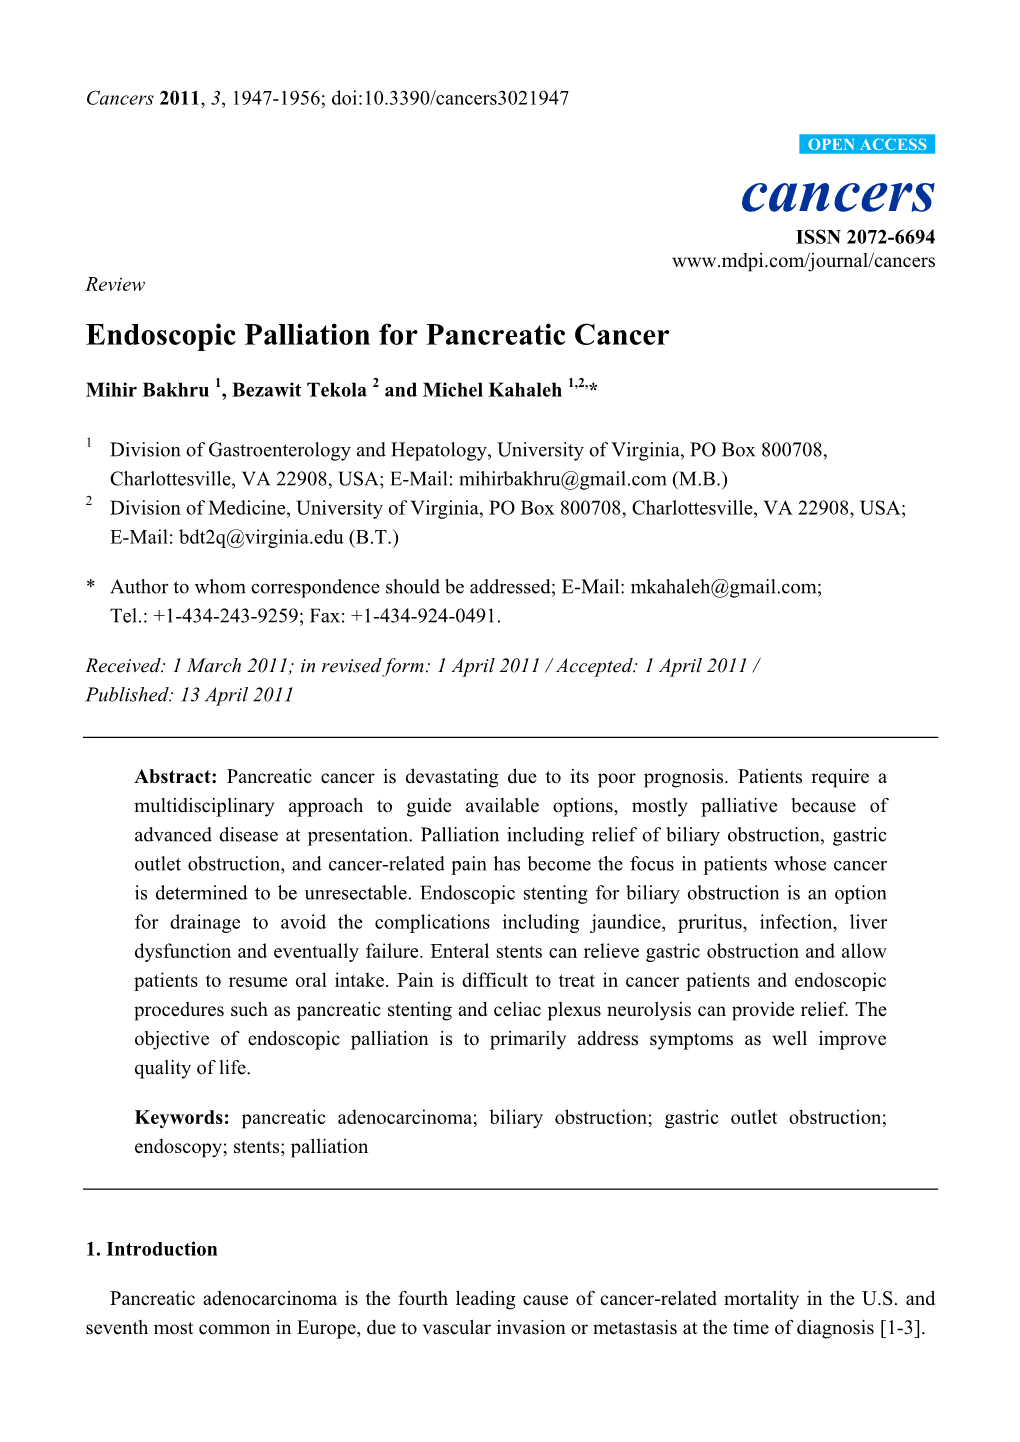 Endoscopic Palliation for Pancreatic Cancer